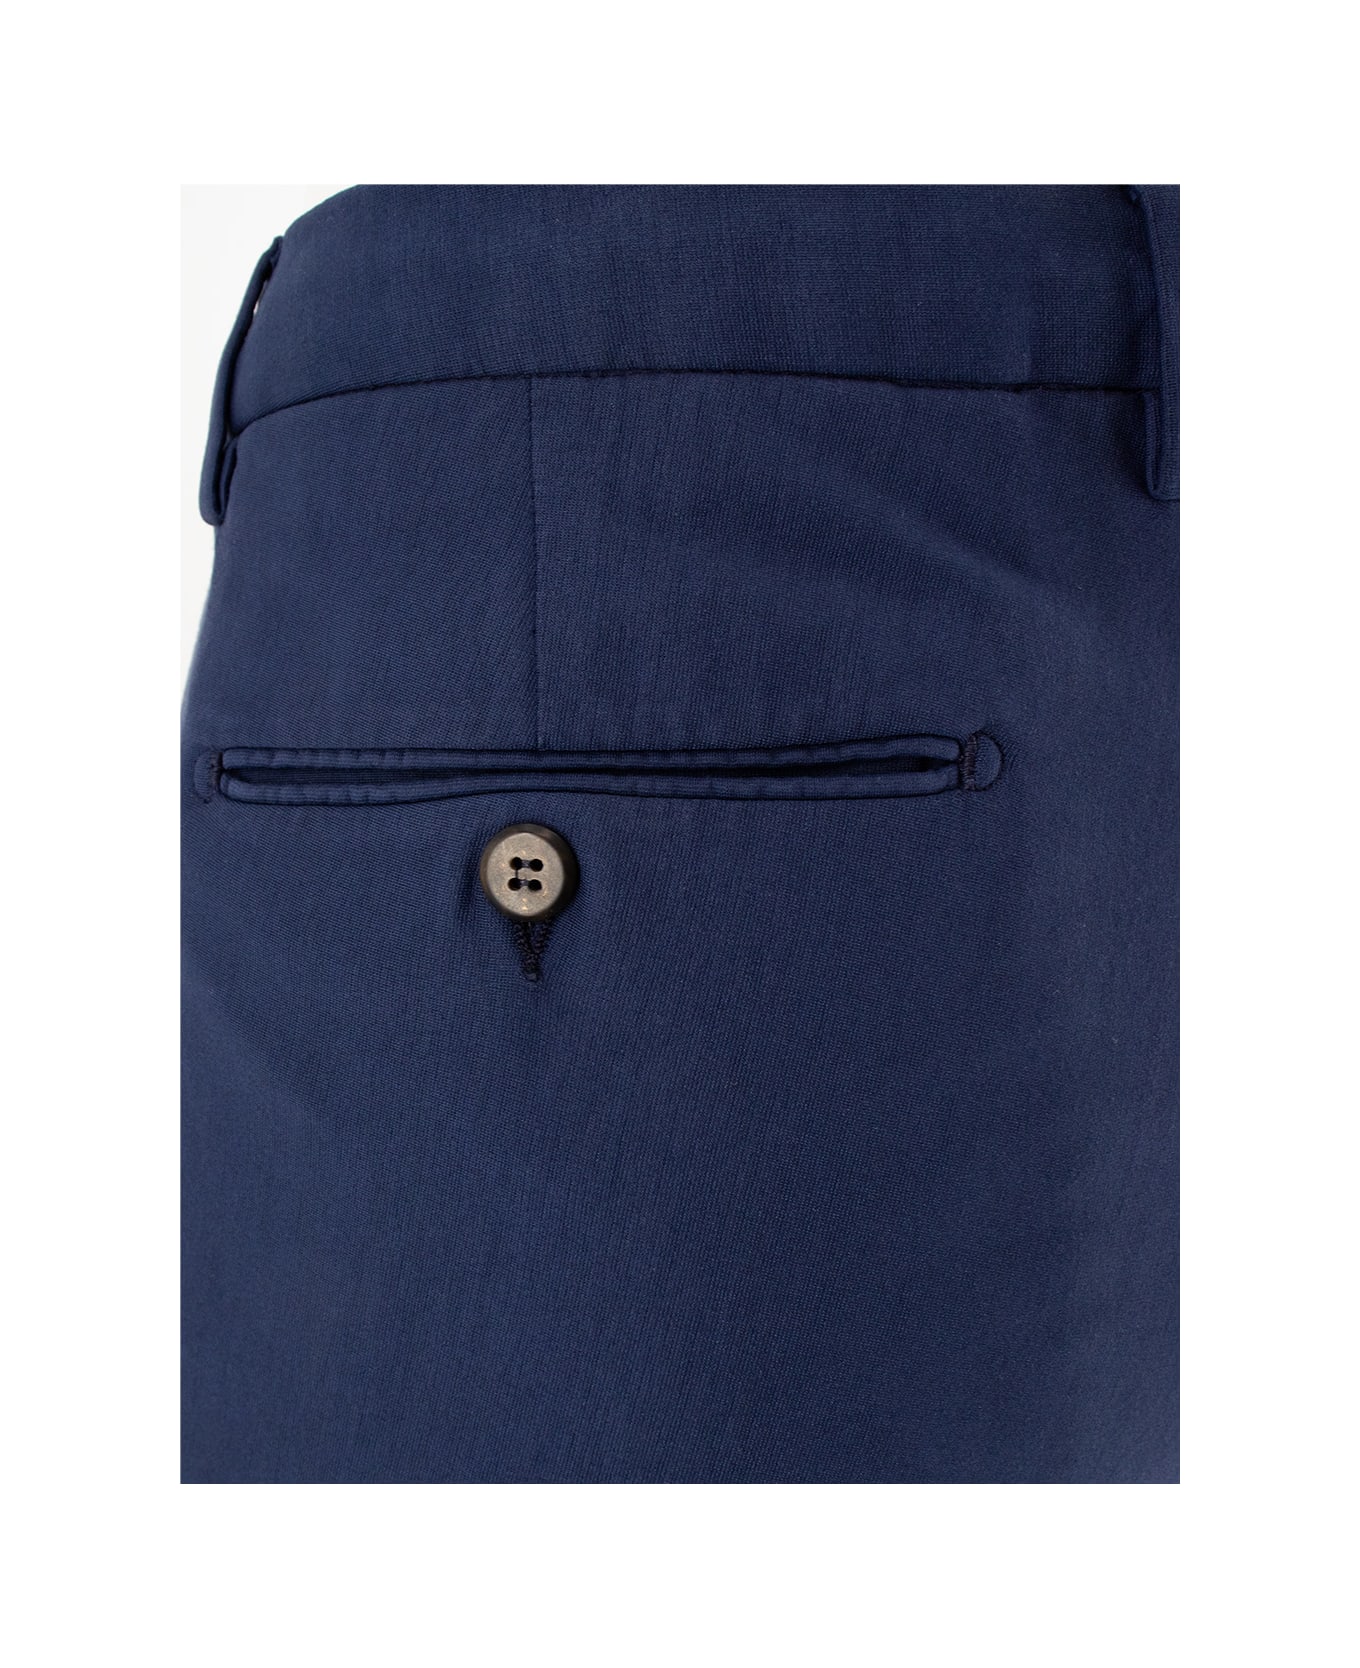 Eleventy Trousers - ROYAL BLUE ボトムス